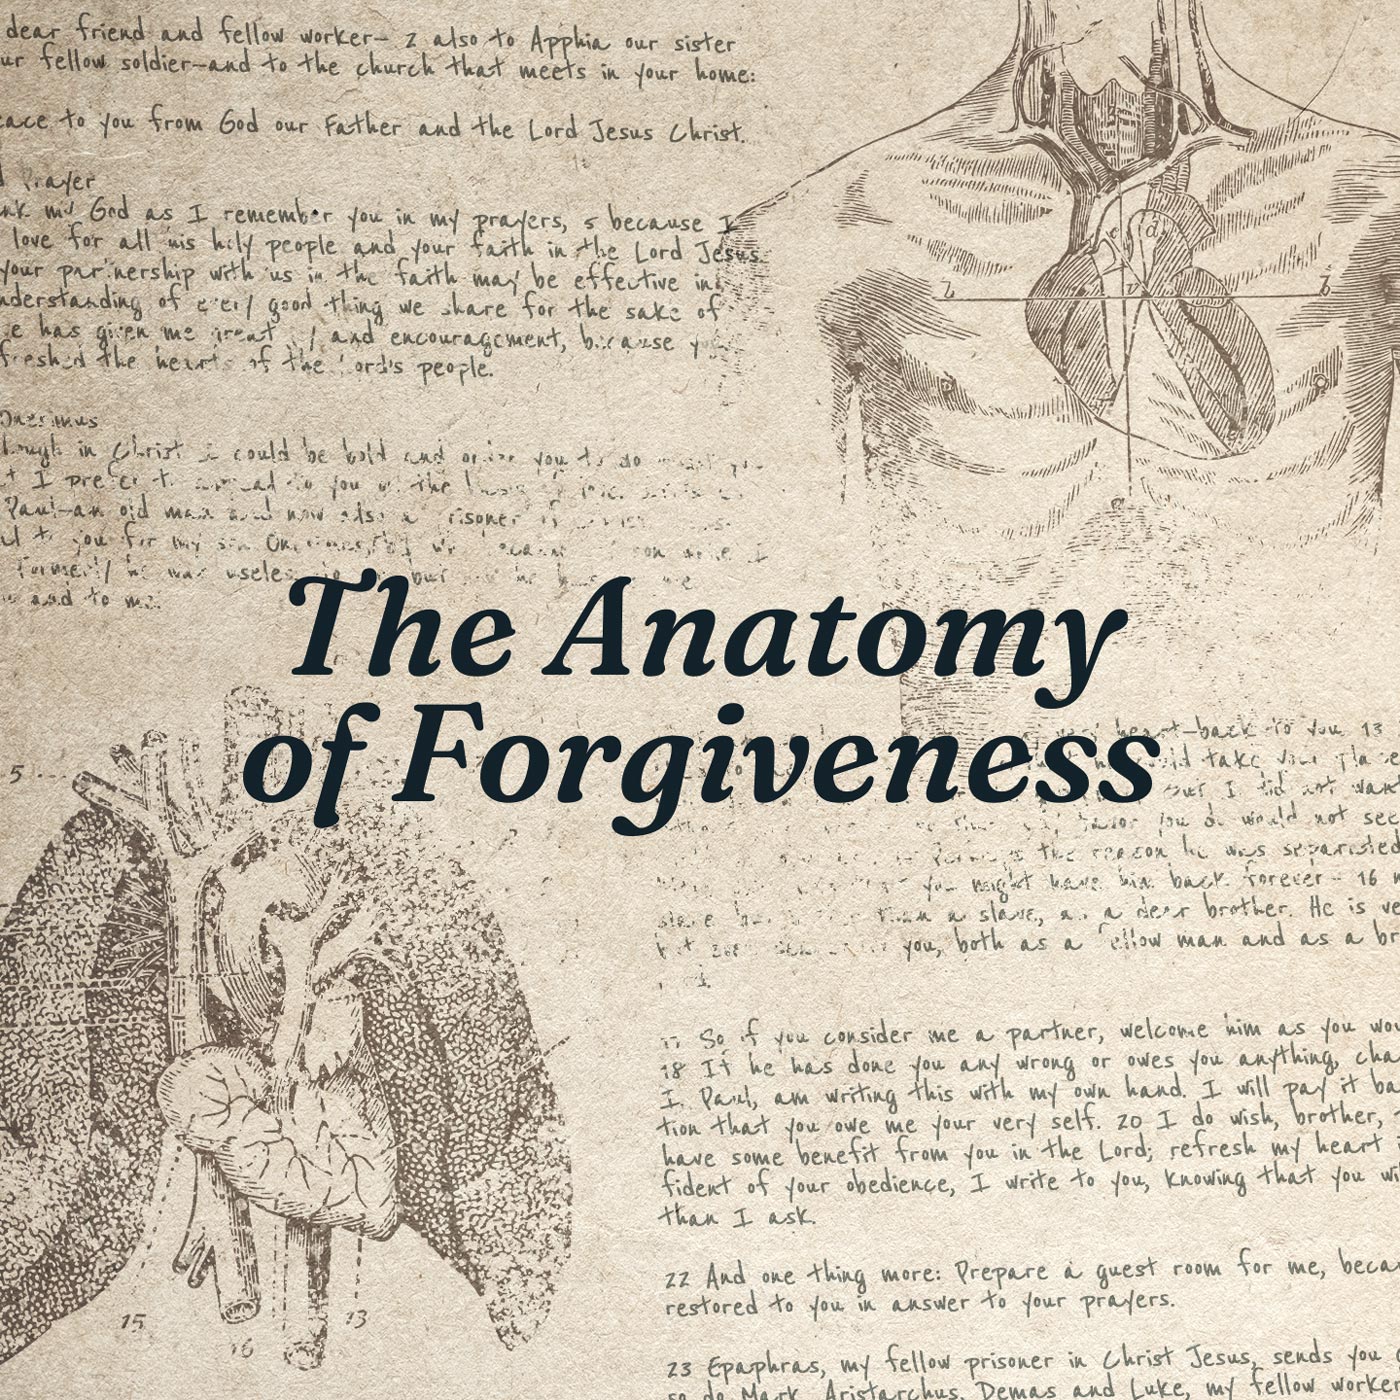 The Anatomy of Forgiveness (Part 1)